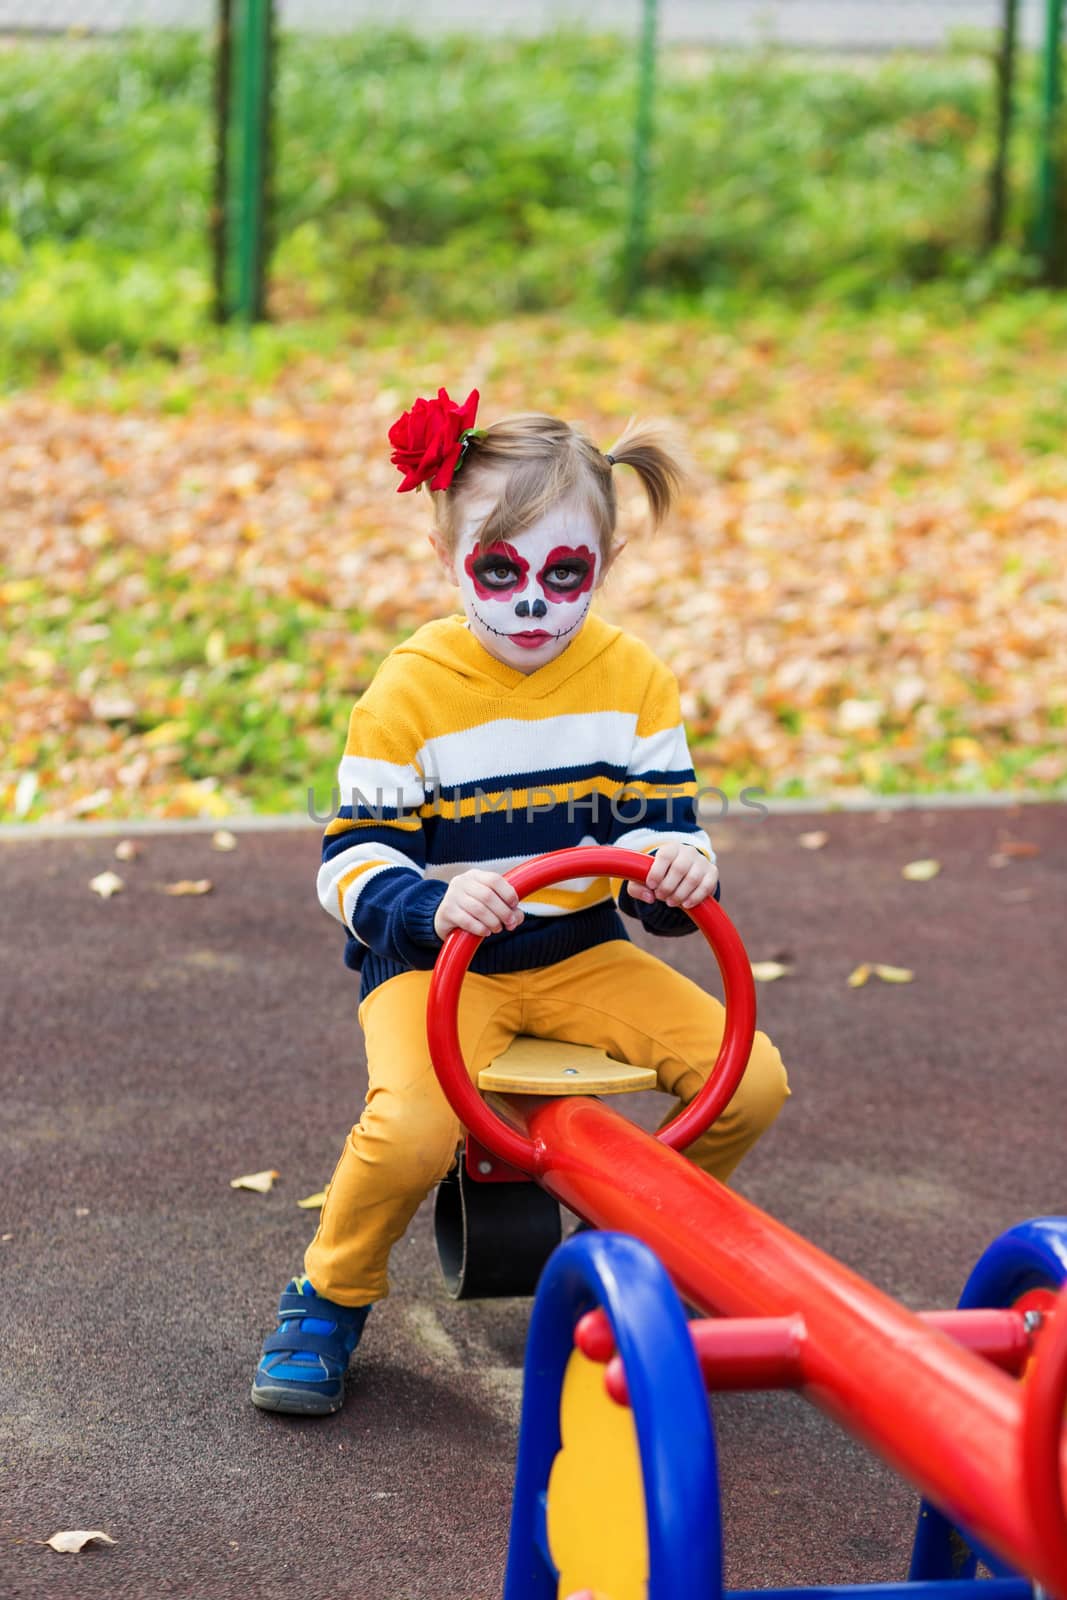 A little preschool girl with Painted Face, rides on a swing in the playground, celebrates Halloween or Mexican Day of the Dead.